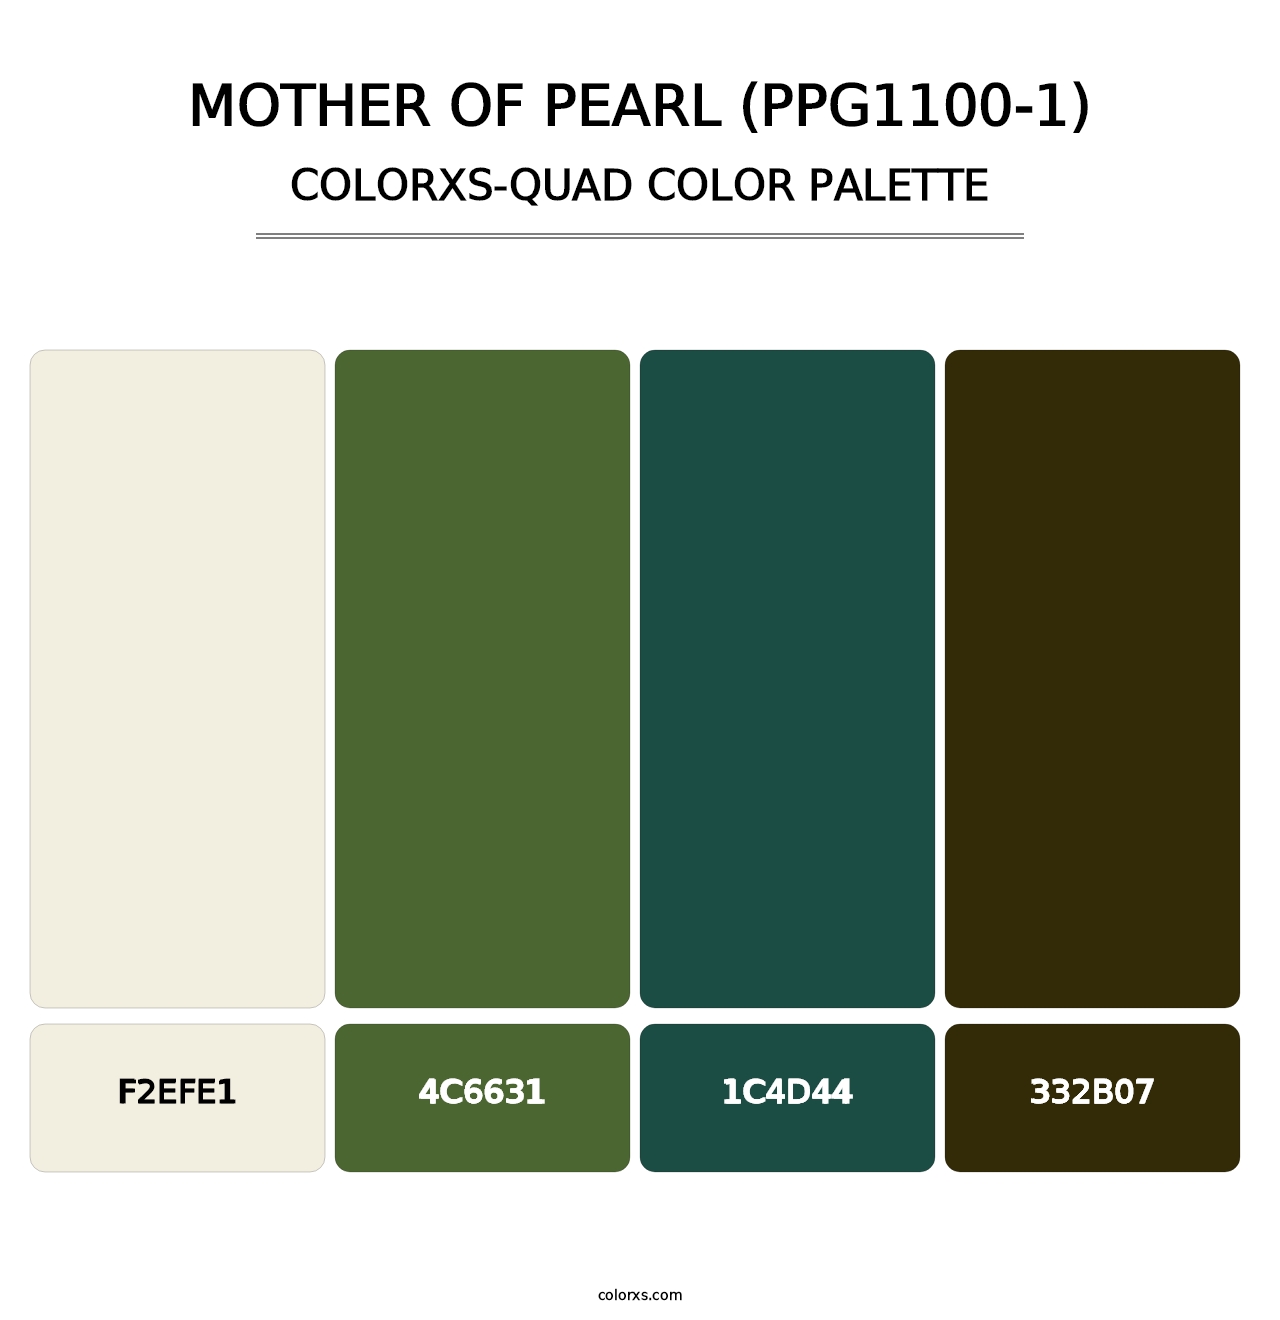 Mother Of Pearl (PPG1100-1) - Colorxs Quad Palette